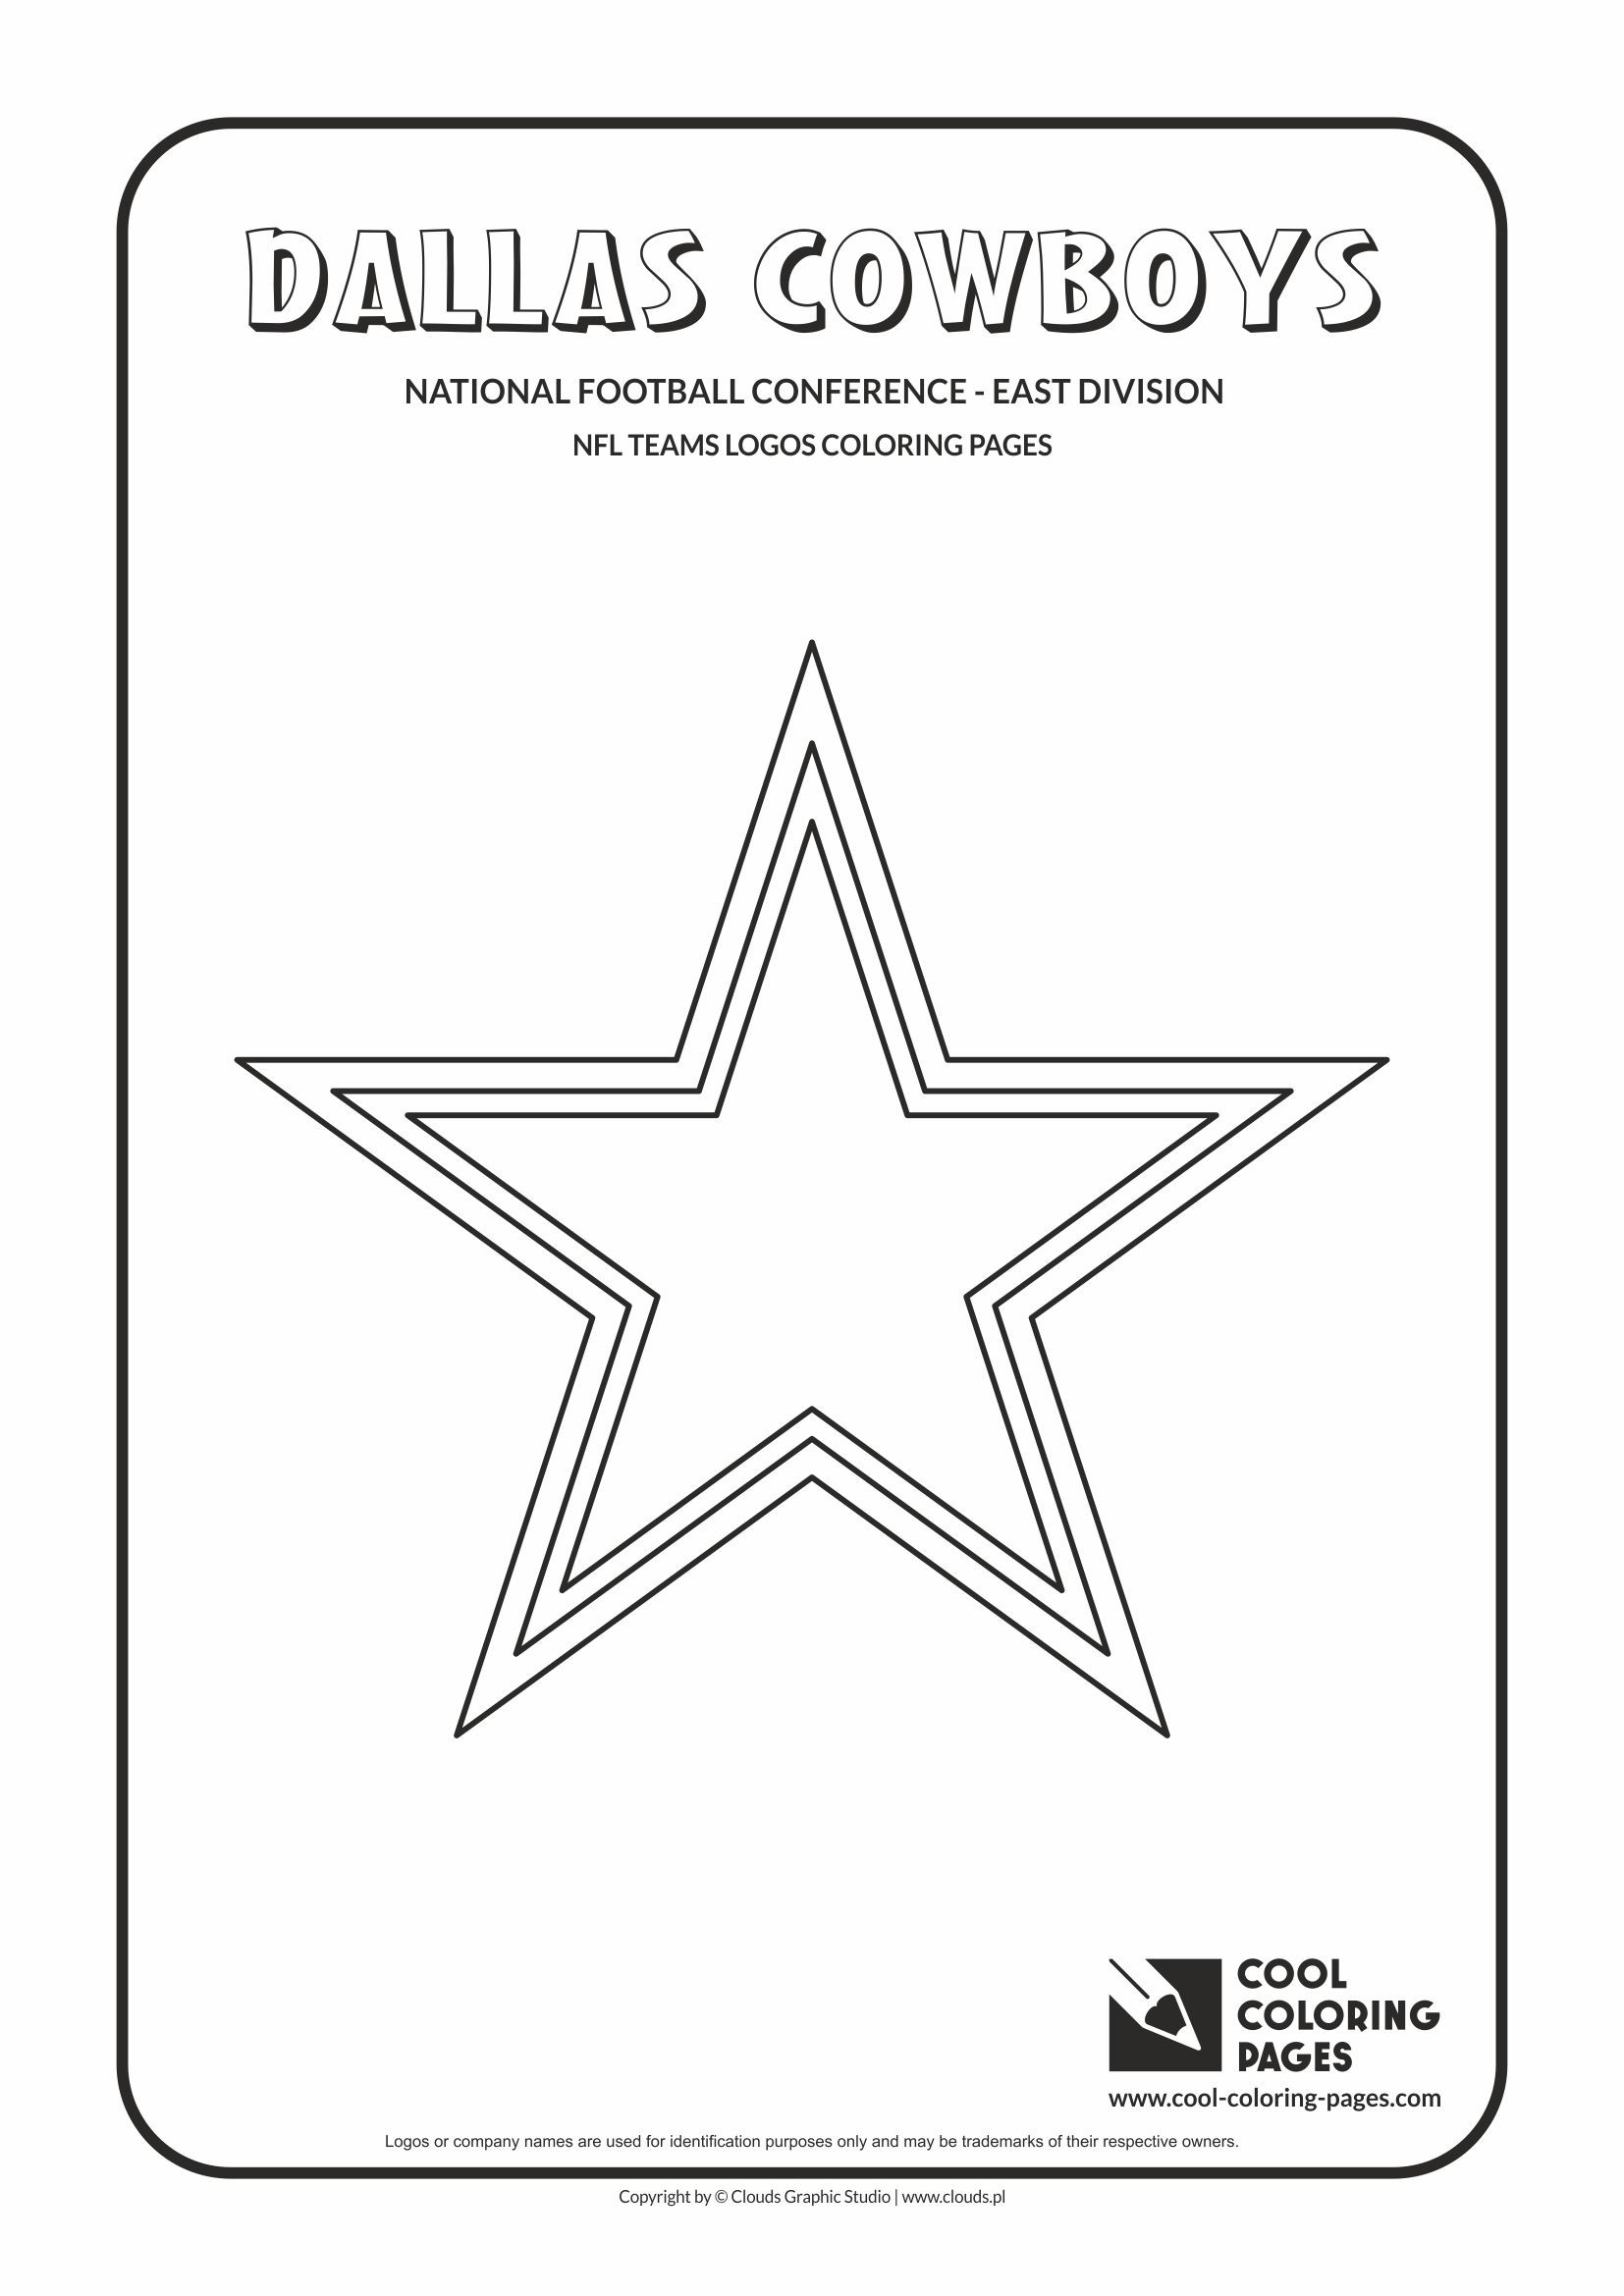 Dallas Cowboys Coloring Book
 Cool Coloring Pages NFL teams logos coloring pages Cool